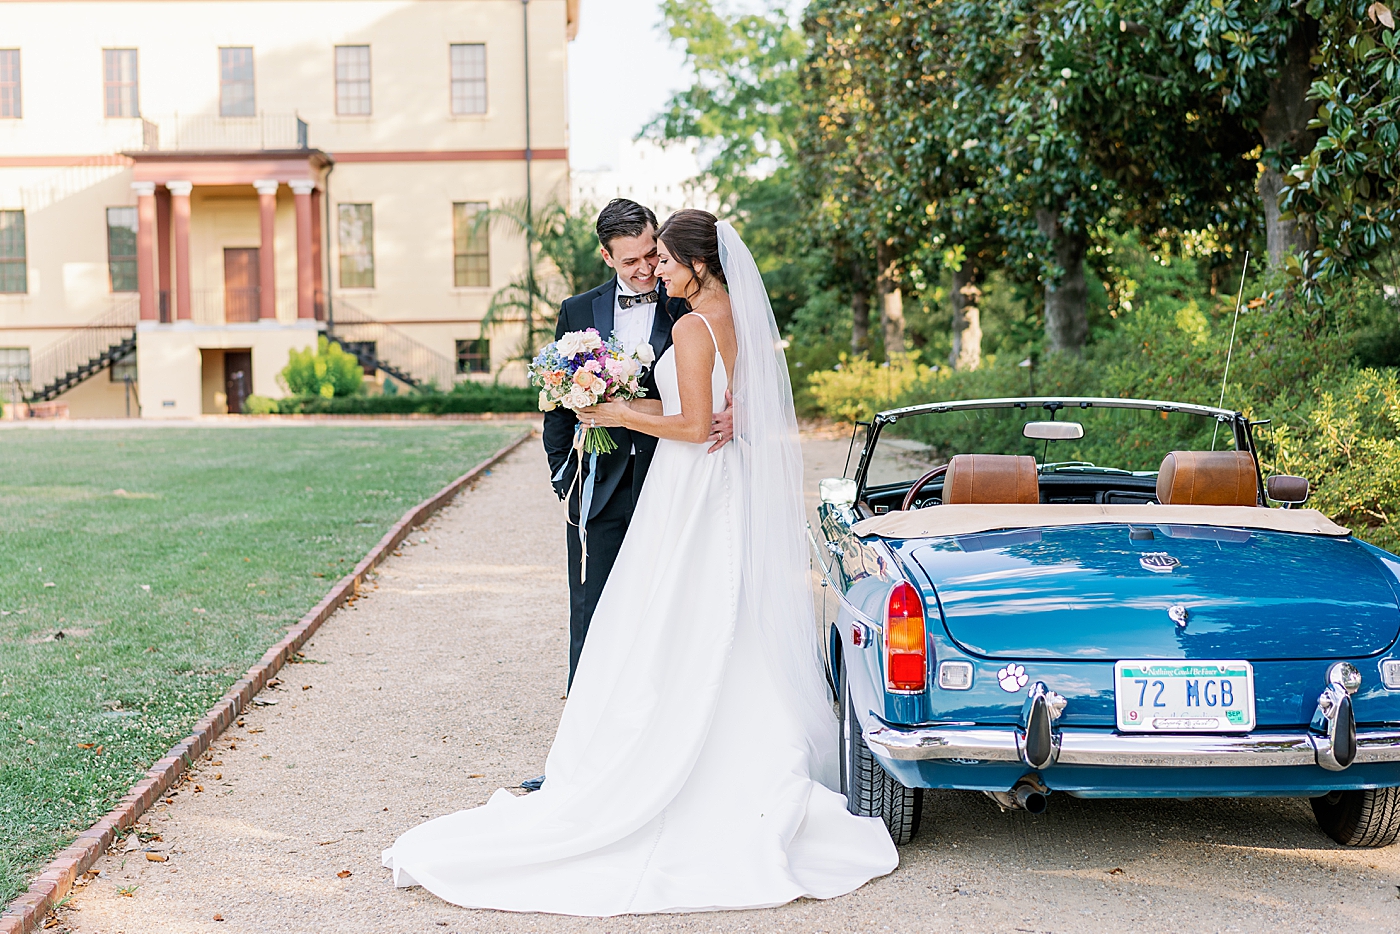 Bride and groom posing by blue vintage car | Photo by Annie Laura Photo